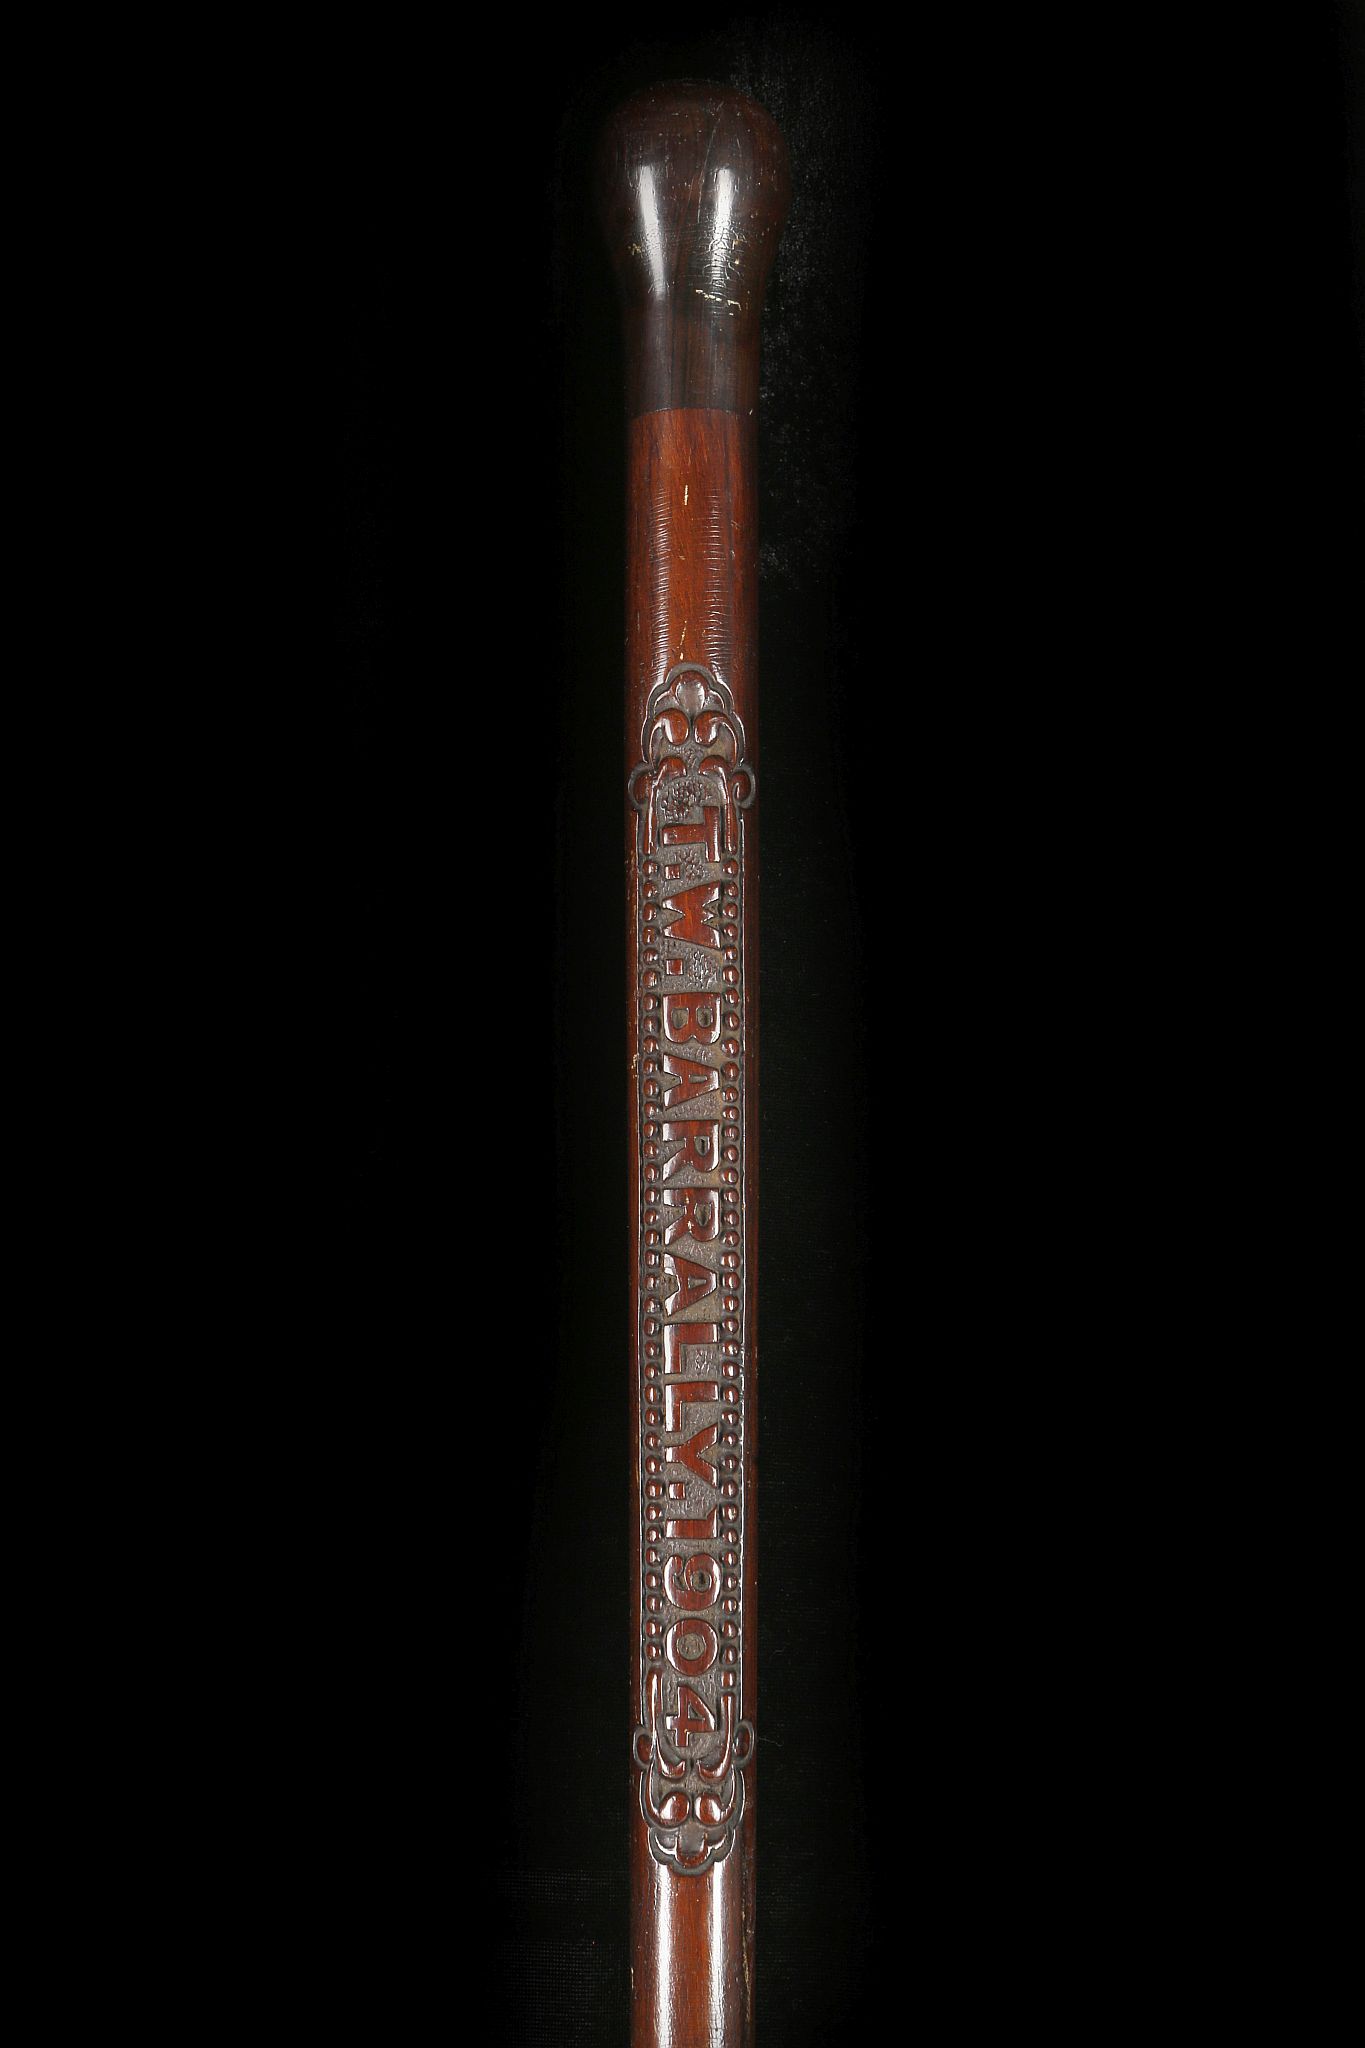 A FINE FOLK CARVED HARDWOOD WALKING CANE. With mushroom knop and the name 'T.W. Barrally' carved